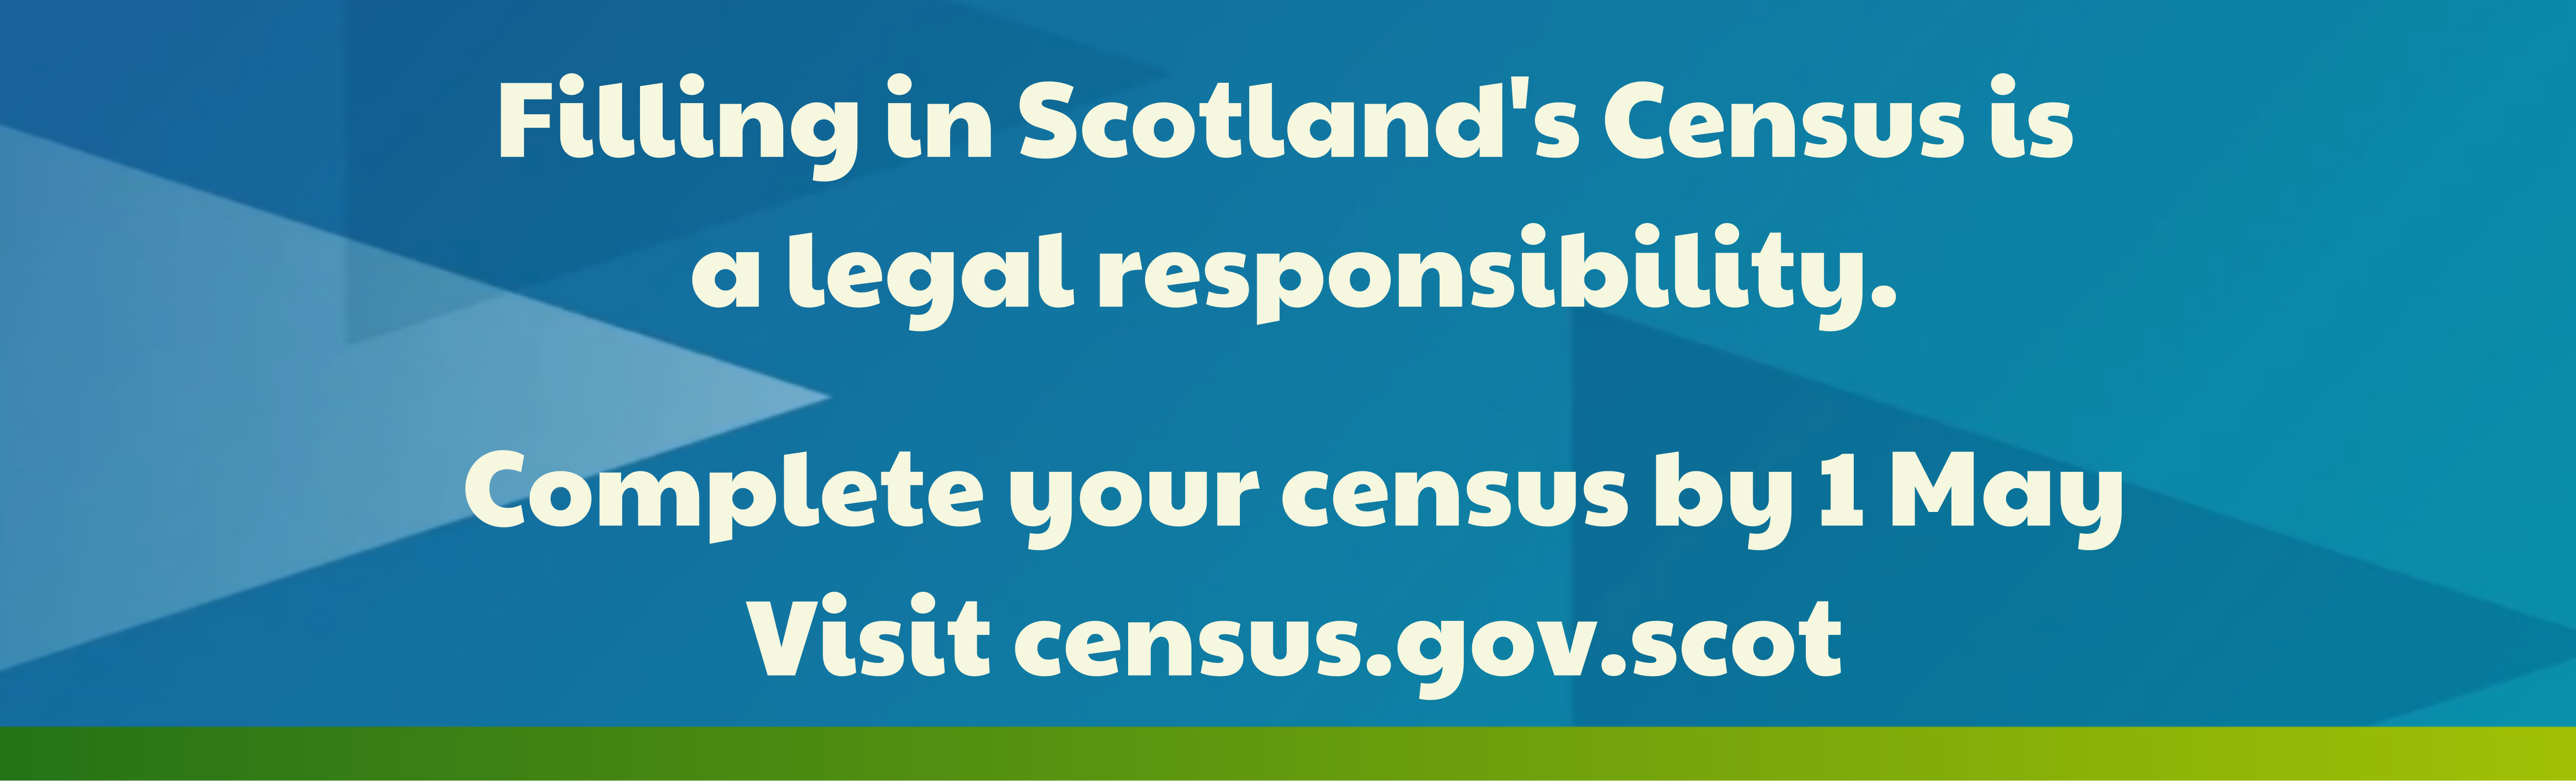 Filling in Scotland's Census is a legal responsibility. Complete your census by 1 May Visit census.gov.scot